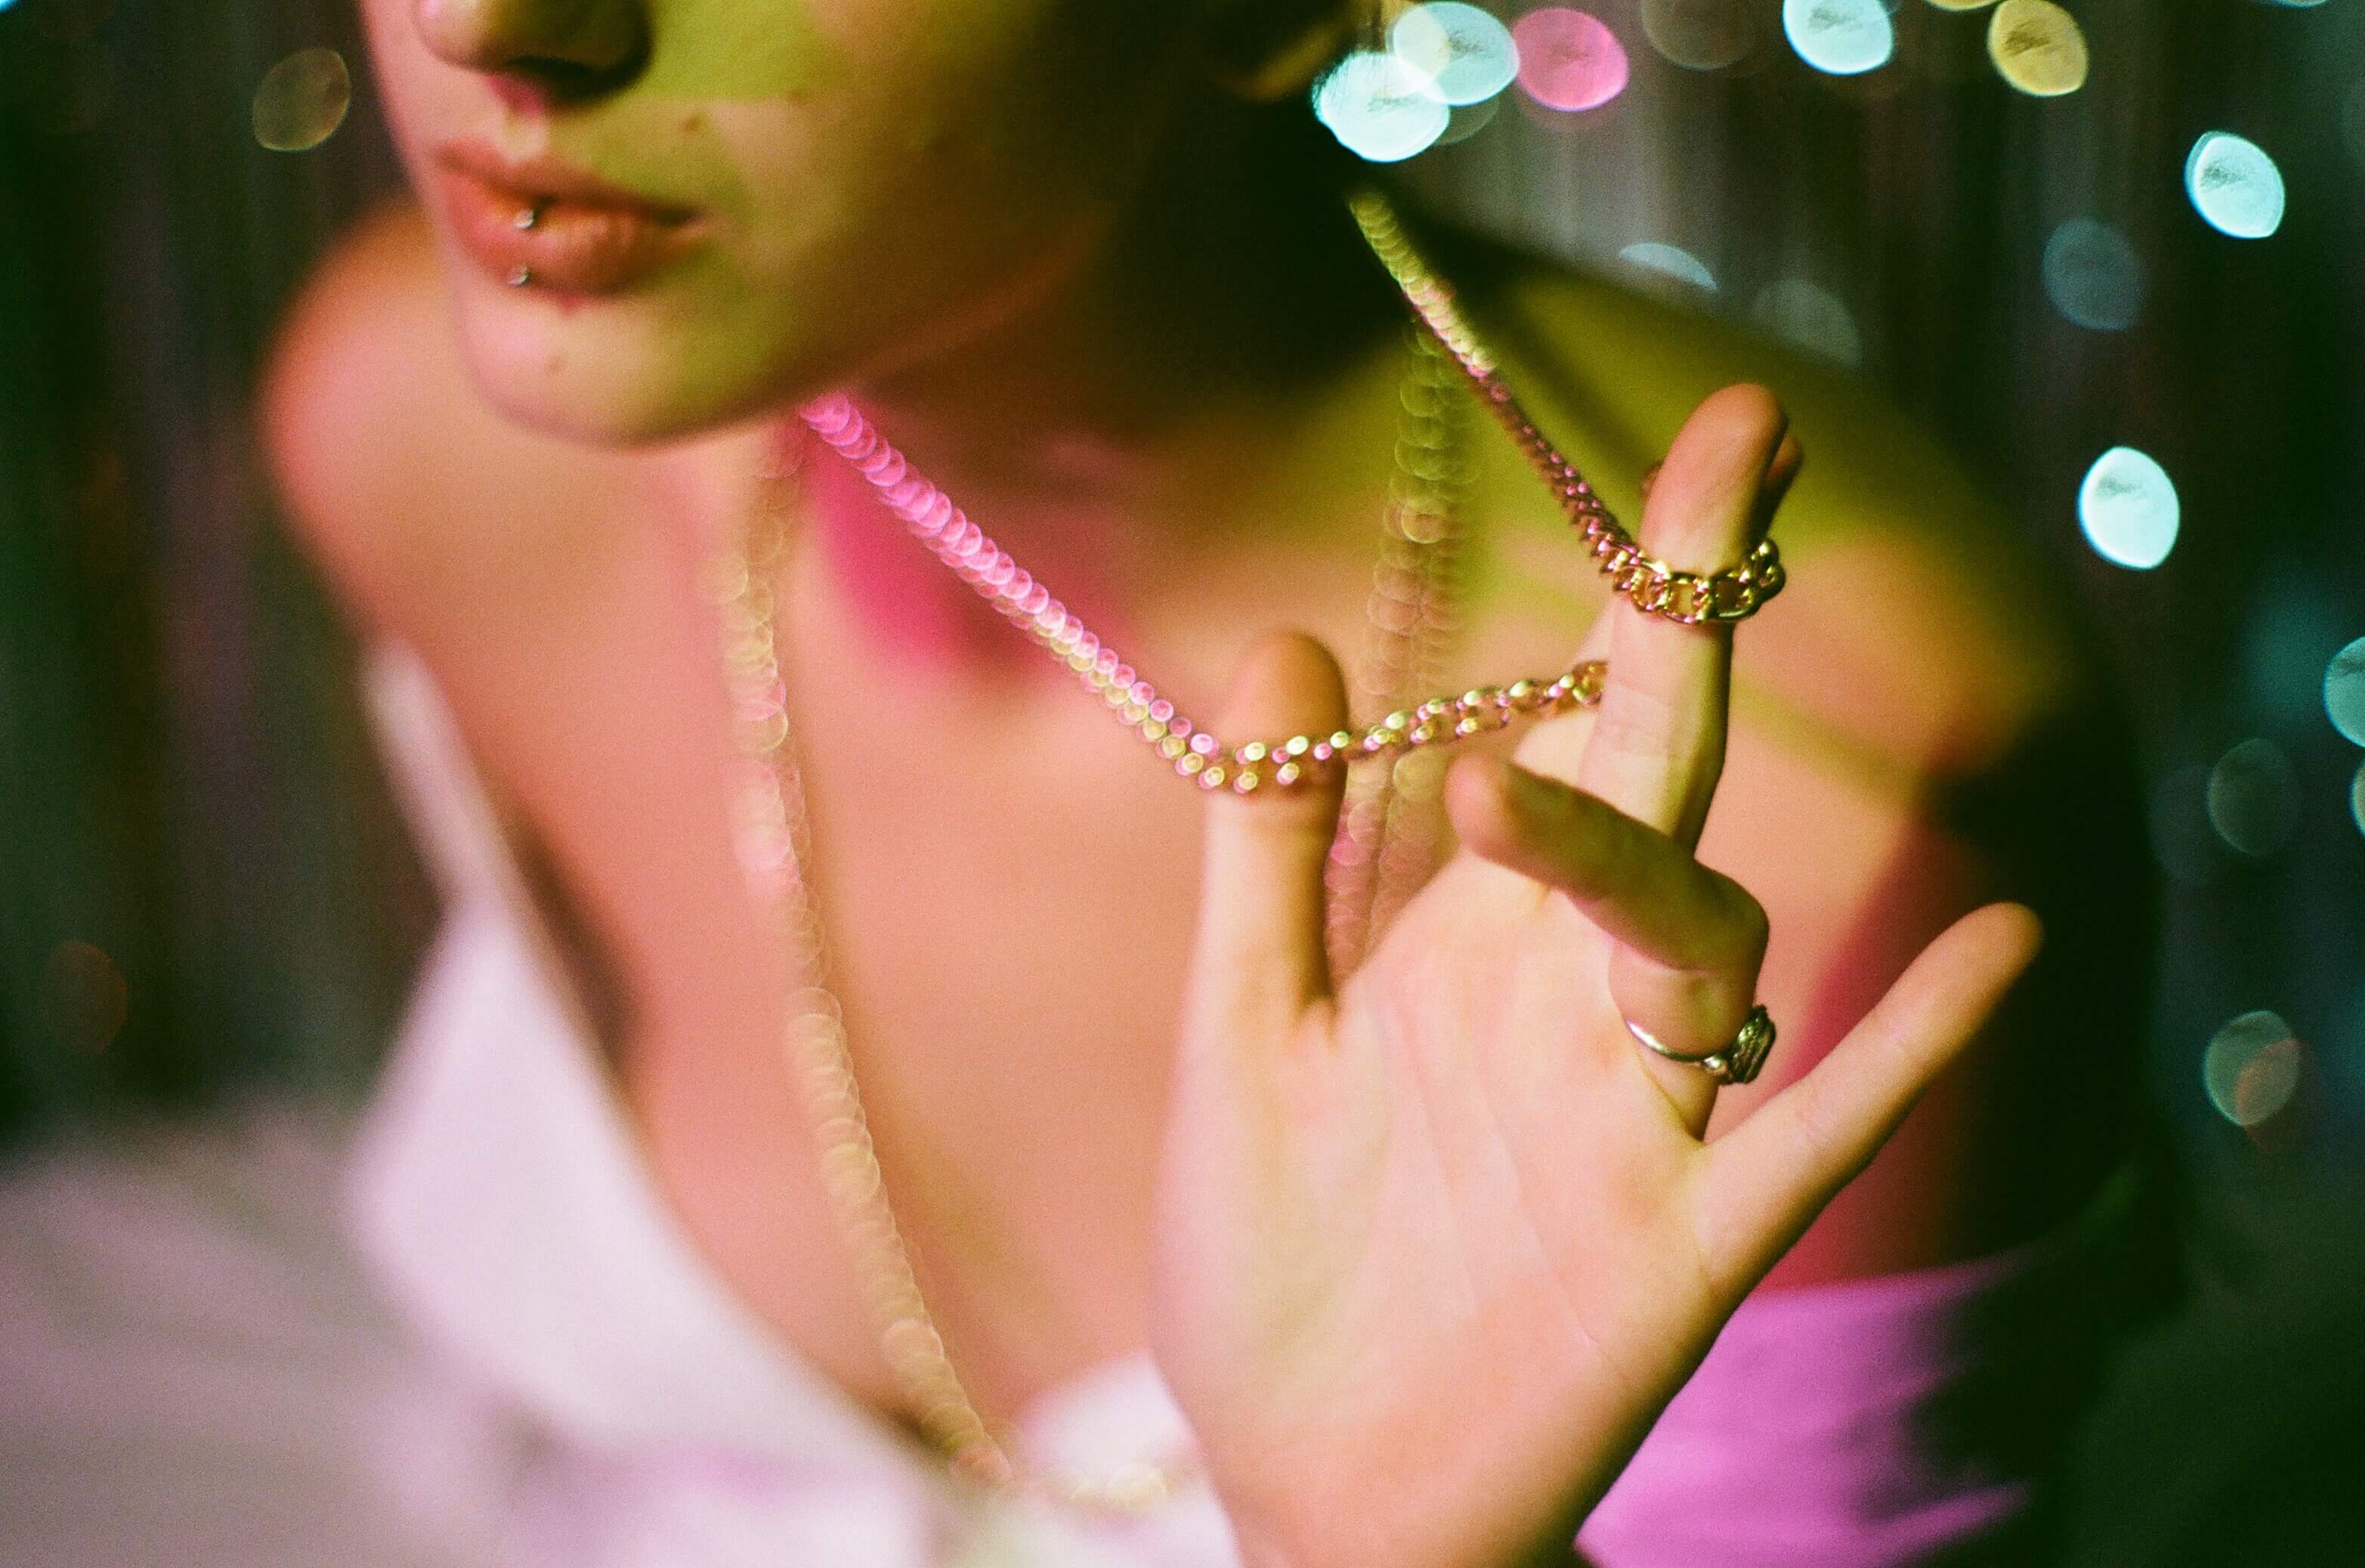 Close up shot of the model's hands playing with their chain necklace. Coloured, sparkly background and coloured lighting